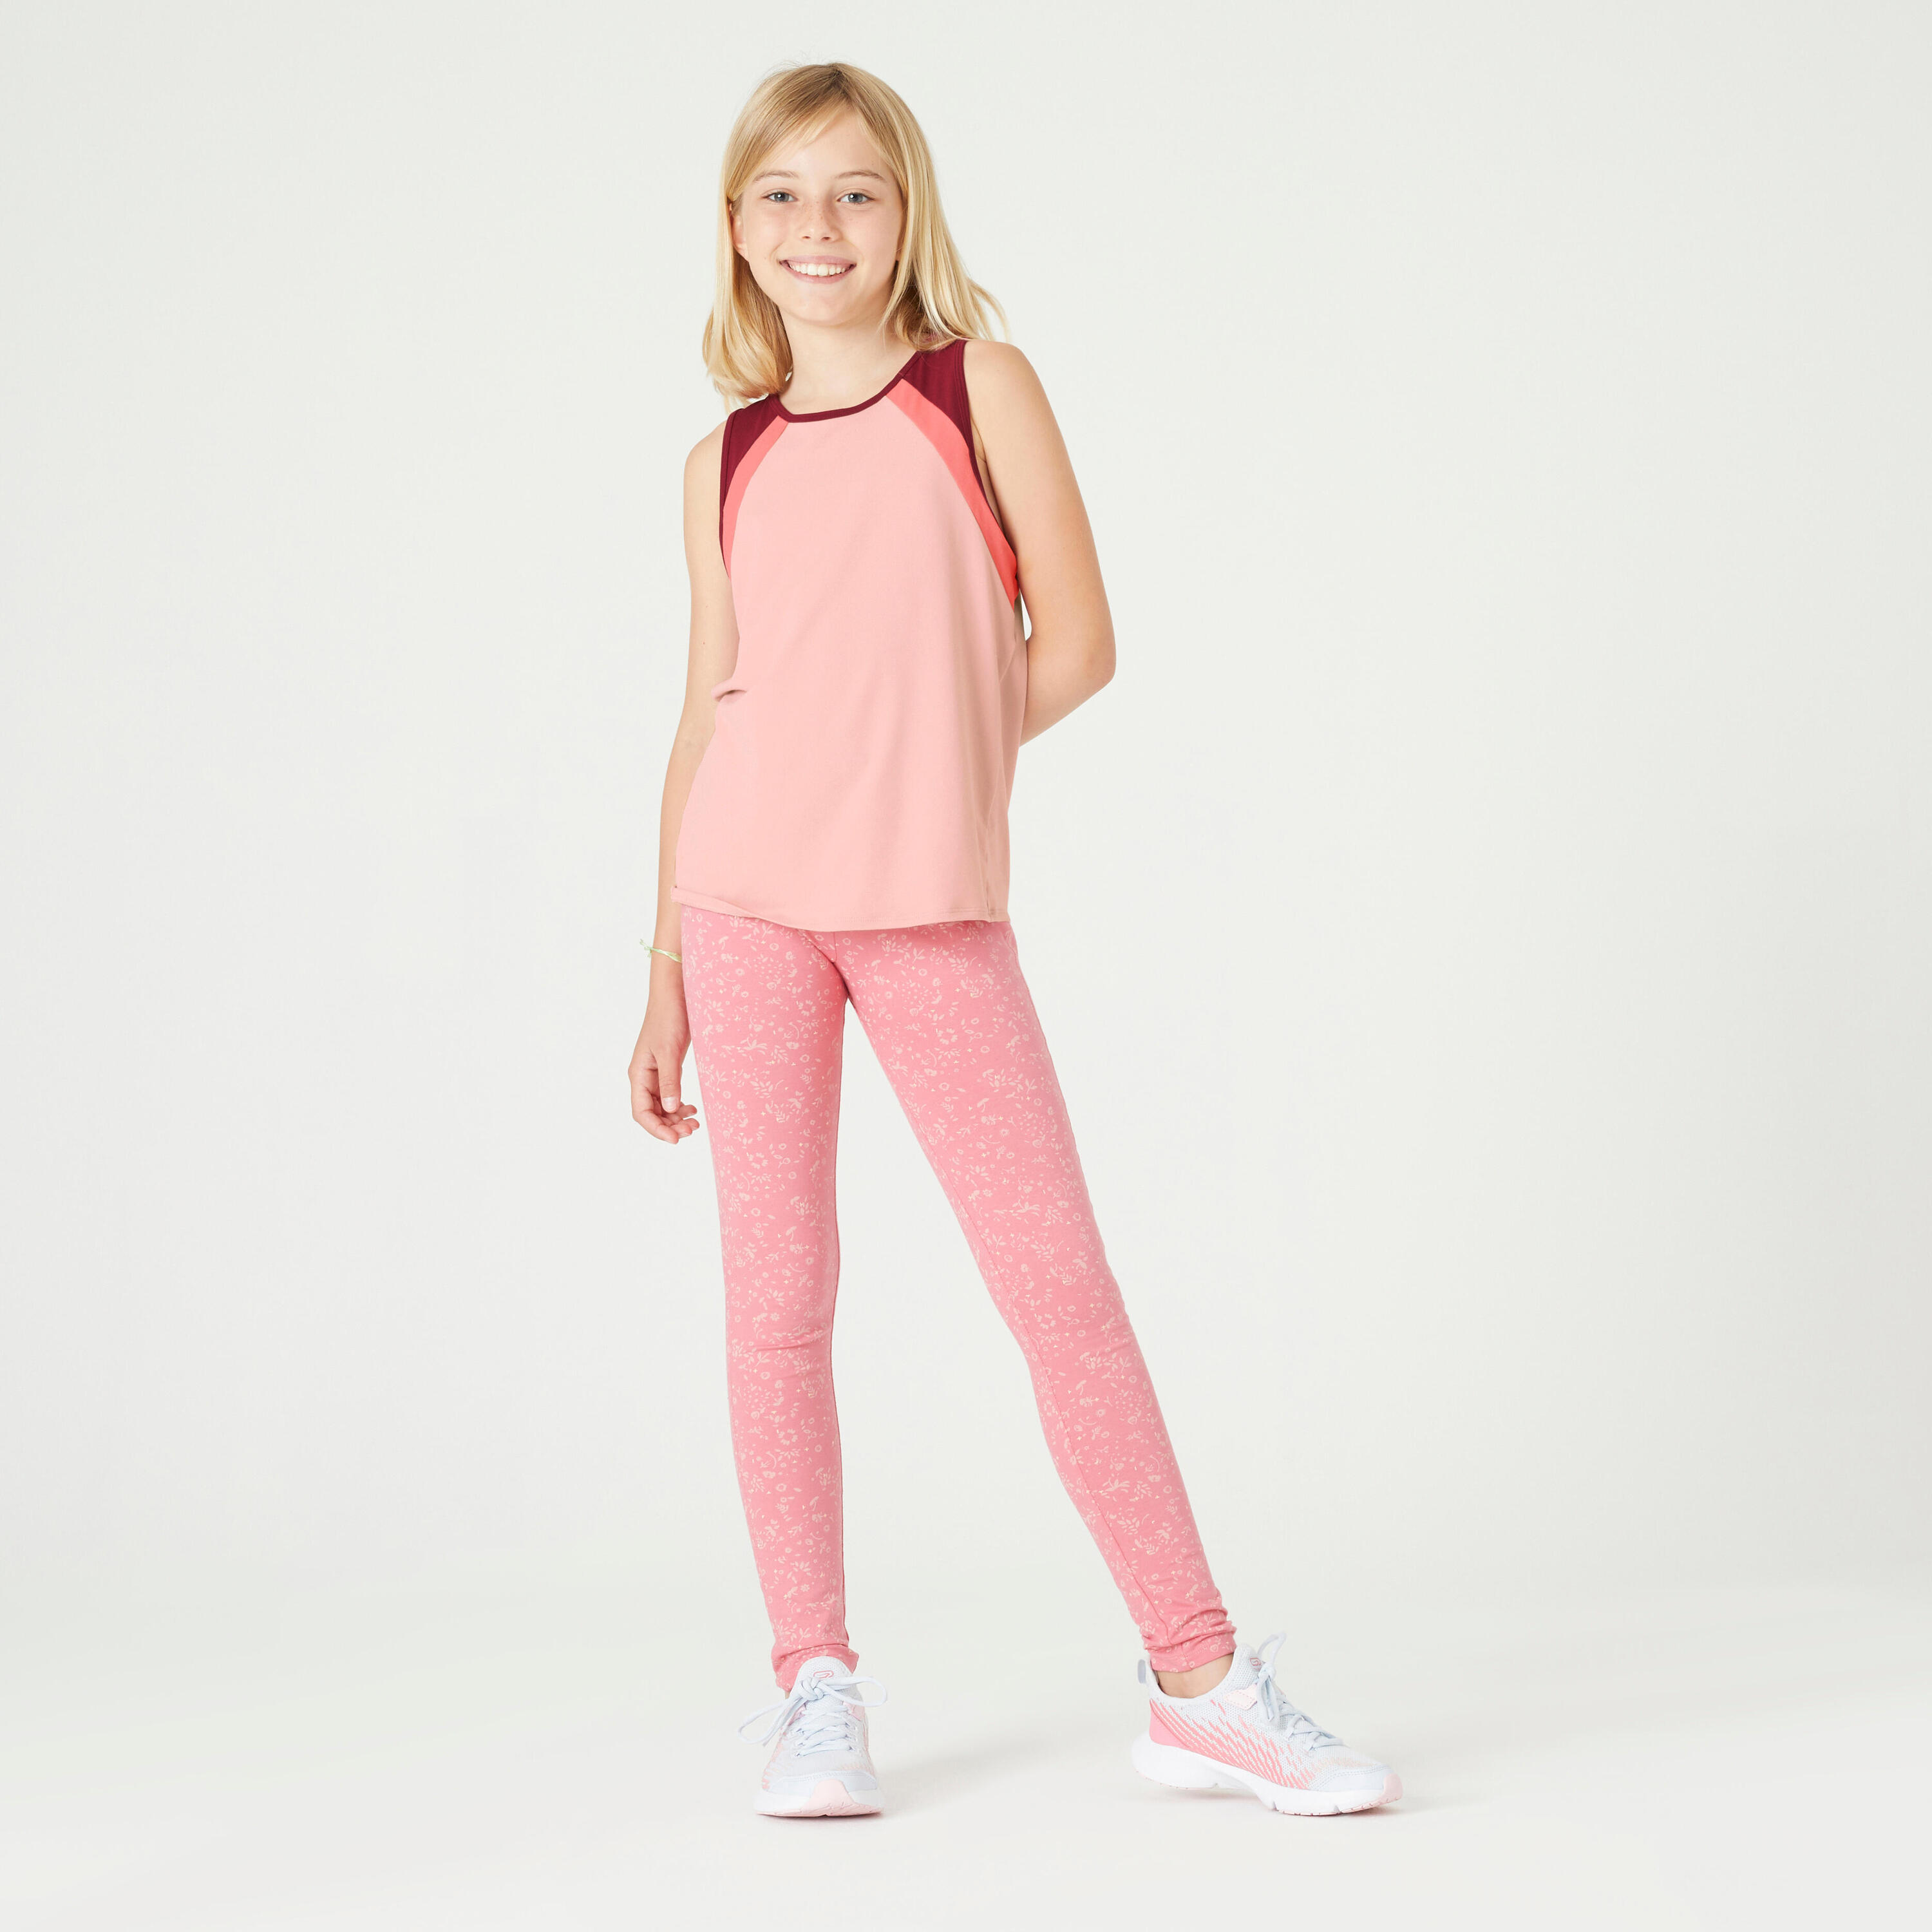 Girls' Breathable Tank Top S500 - Pink 7/7